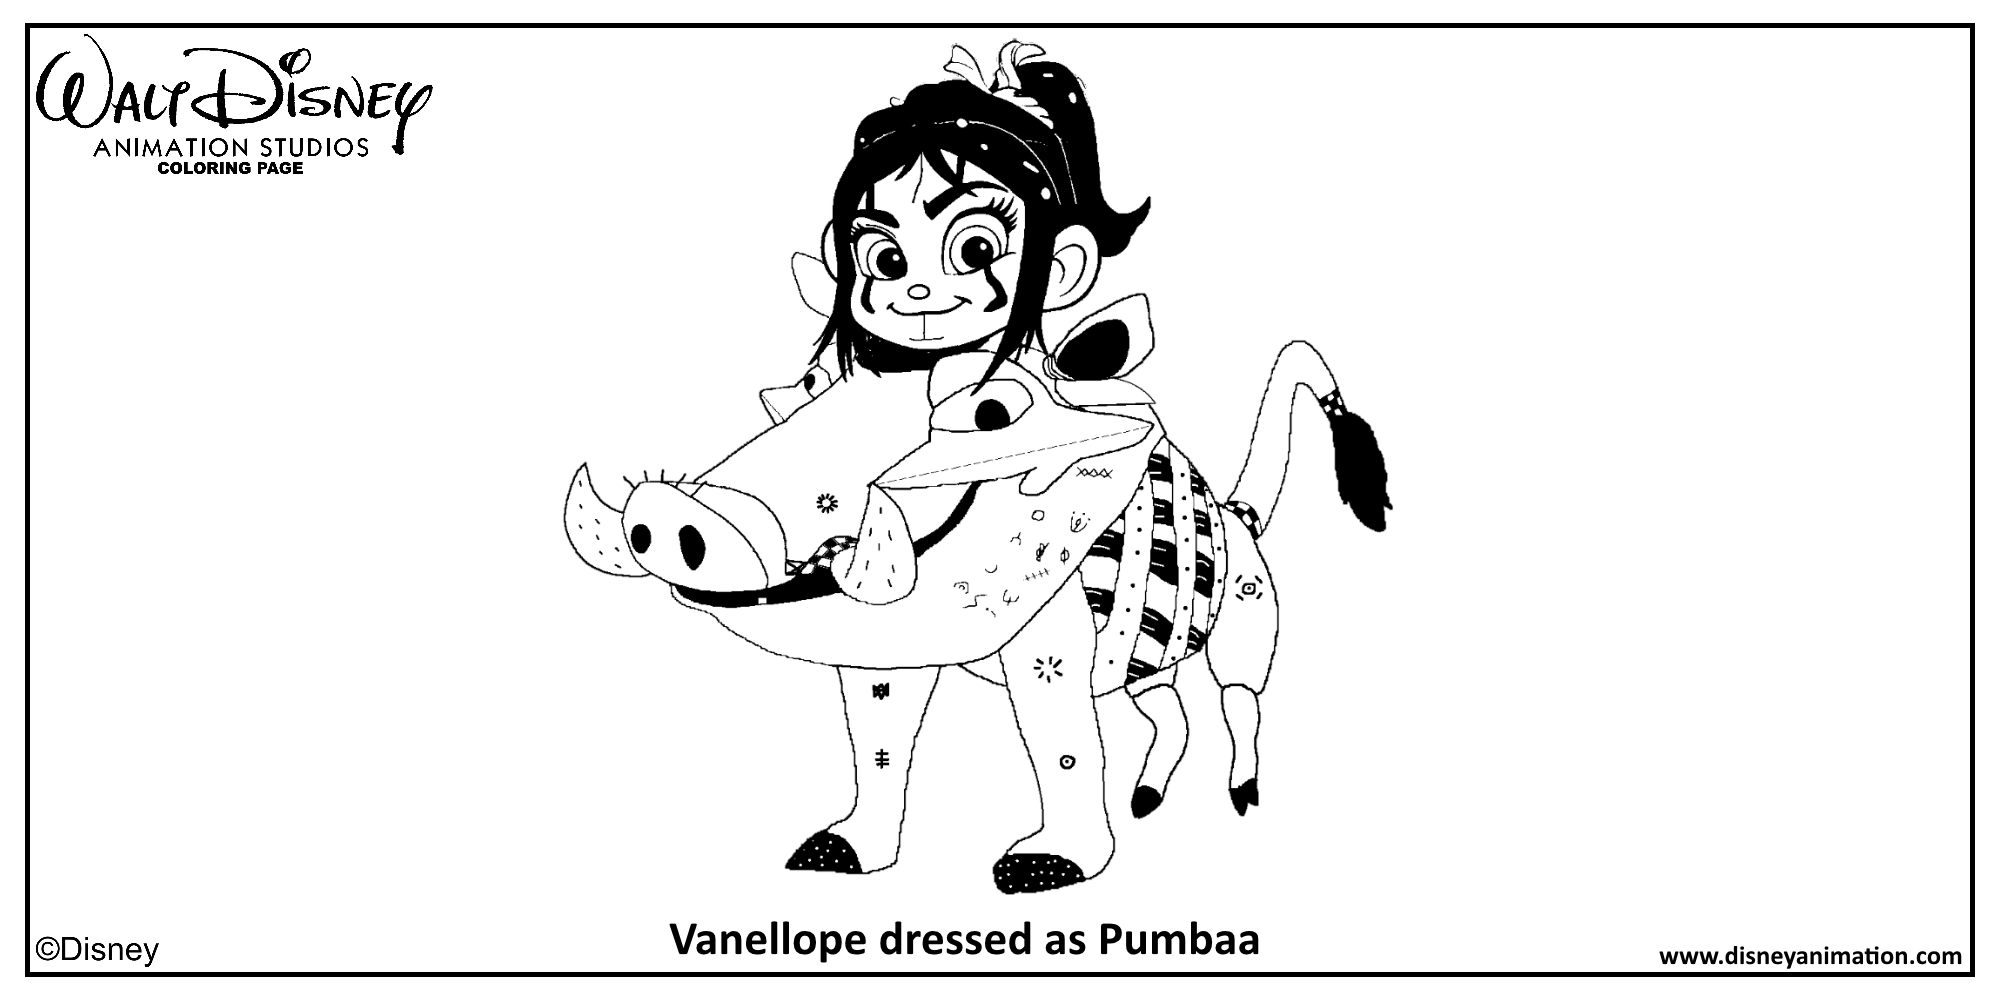 walt-disney-animation-studios-coloring-page-vanellope-dressed-as